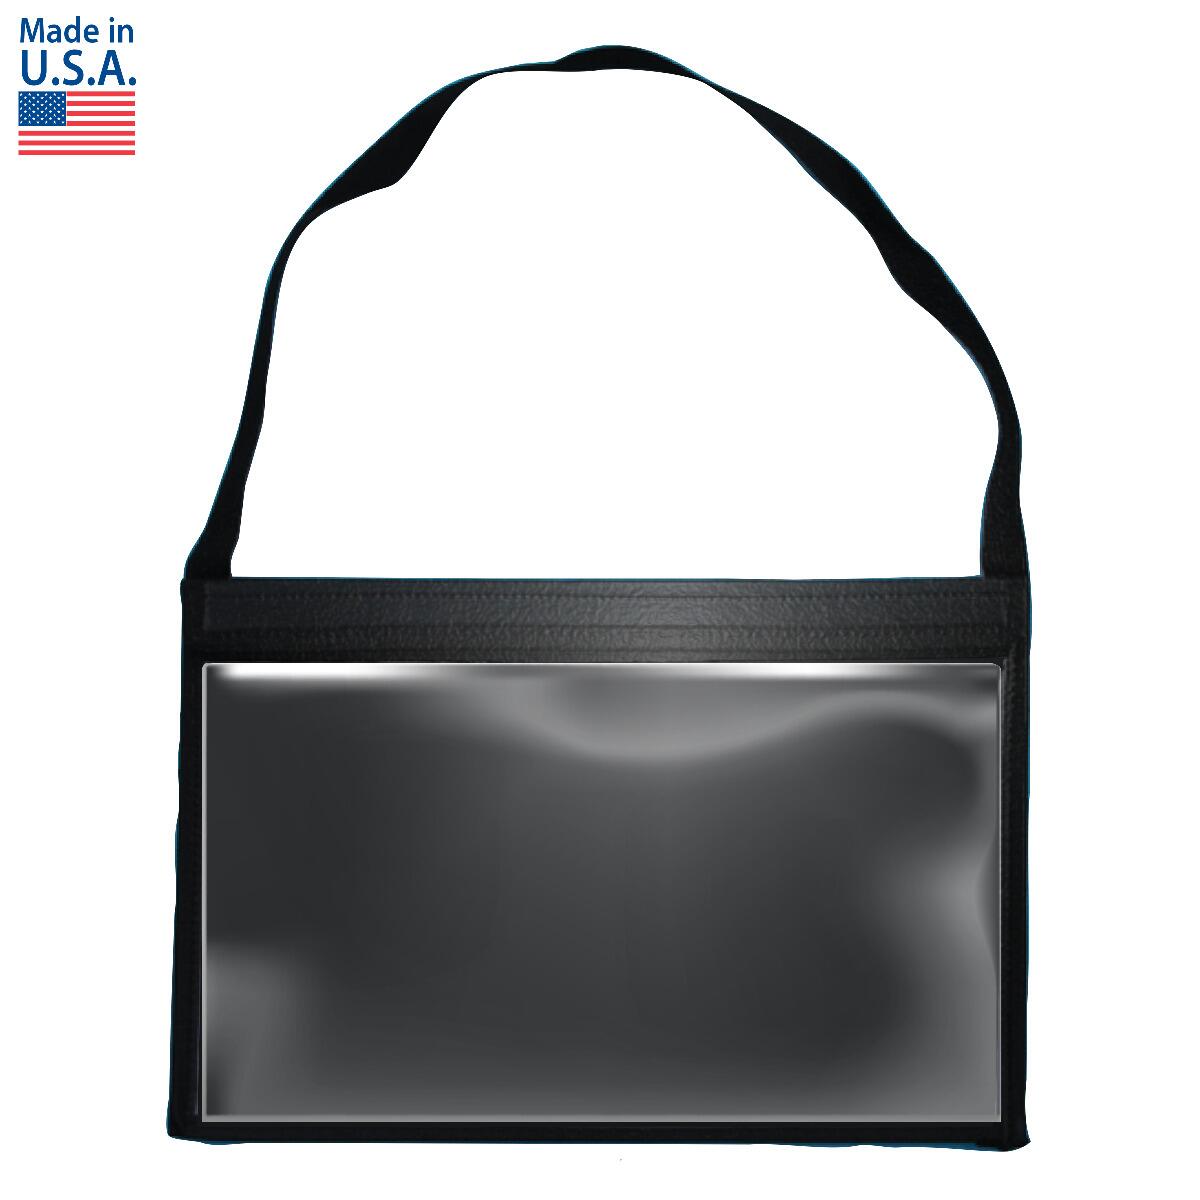 License Plate Bags with Holders